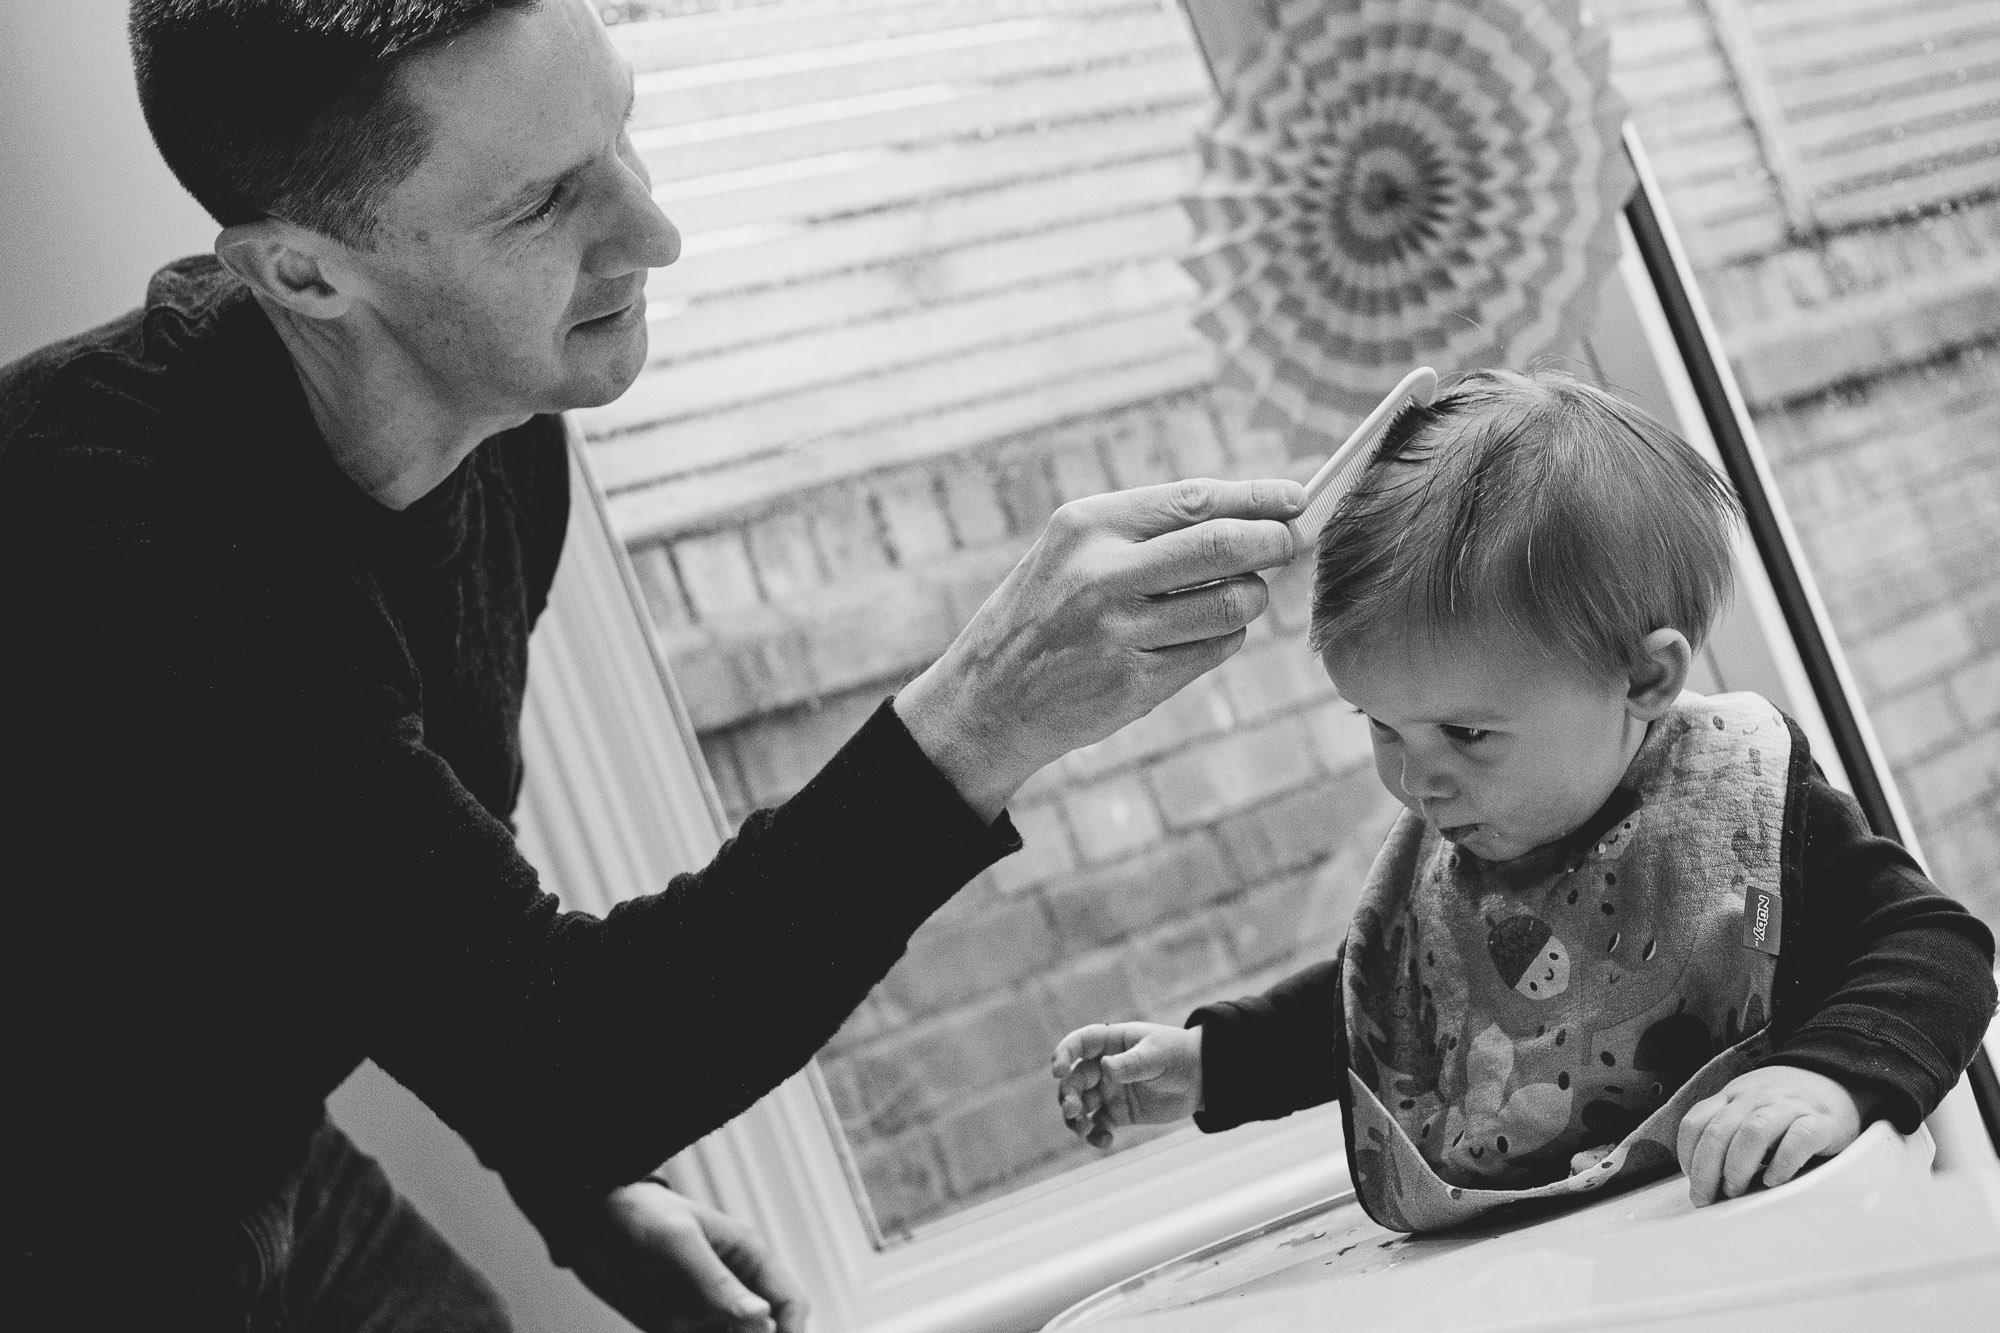 dad-combing-toddlers-hair-family-documentary-photographer-capturing-first-birthday-at-home-london-dulwich.jpg